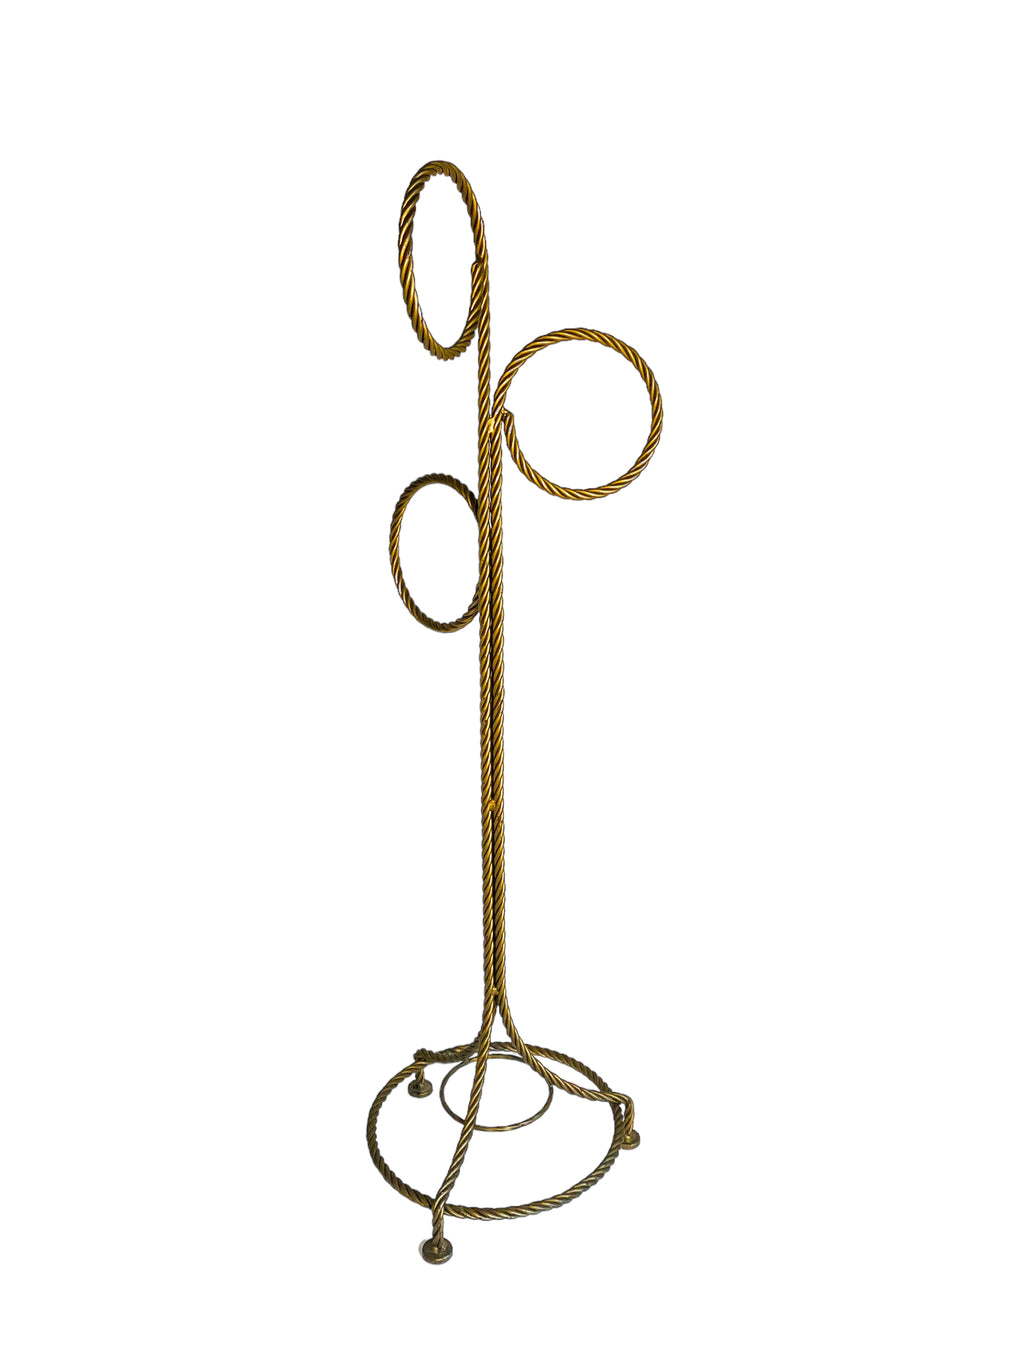 1970’s Hollywood Regency Braided Gilt Iron 3-Ring Towel Holder / Valet, Local Pickup Only**